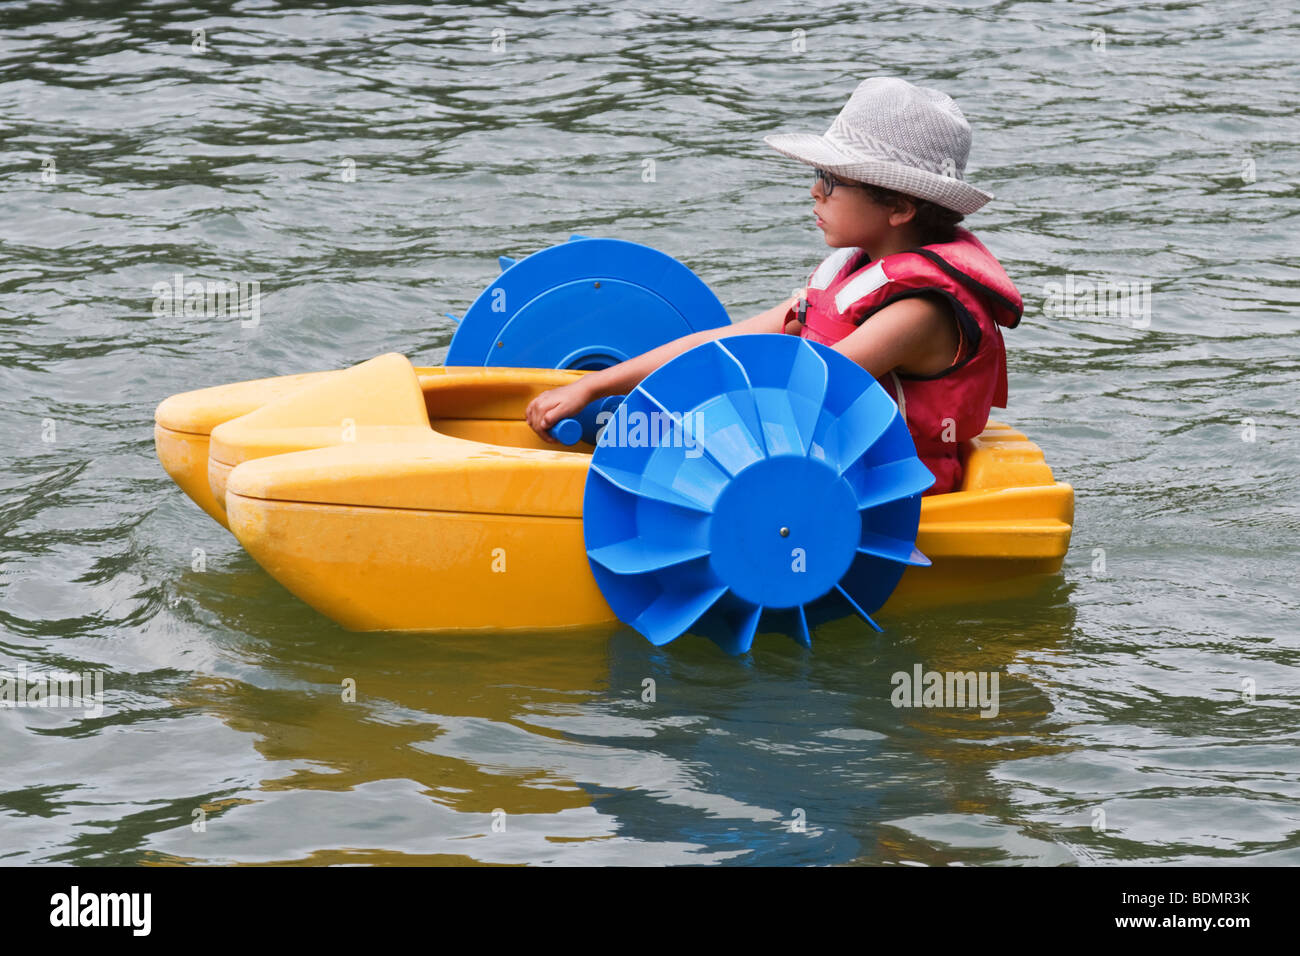 child-rowing-a-paddle-boat-view-from-the-side-close-up-BDMR3K.jpg